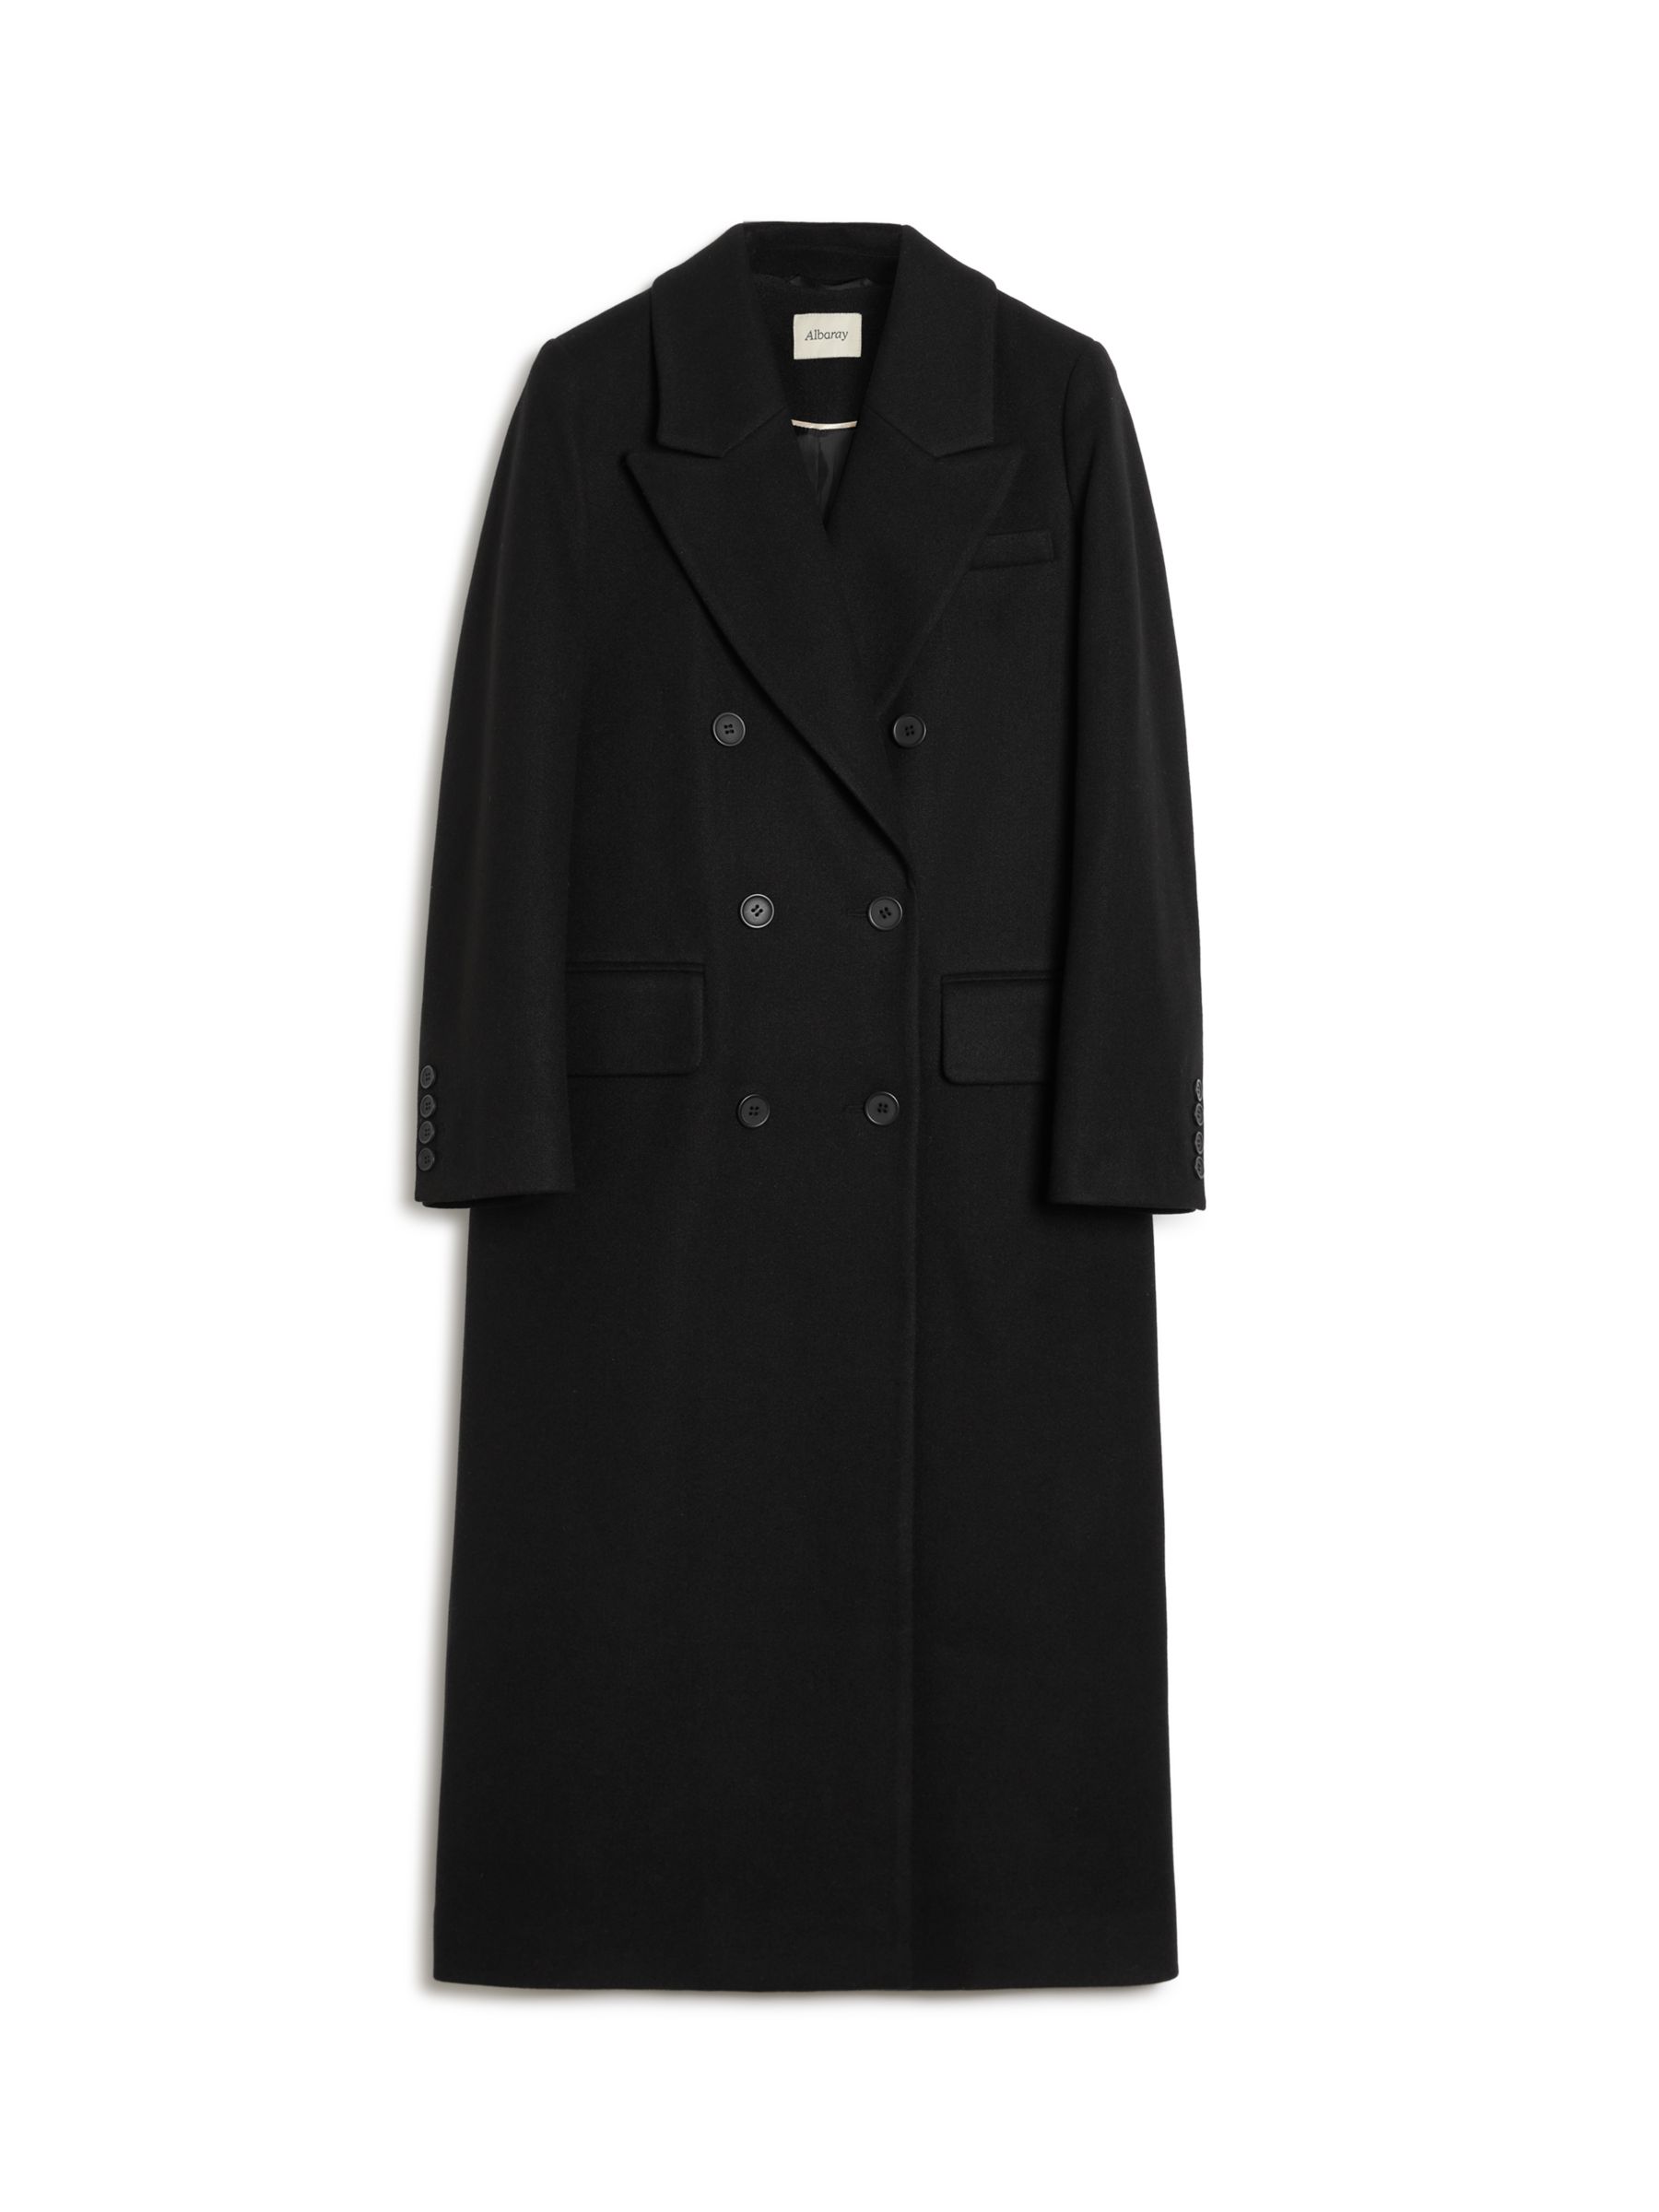 Albaray Double Breasted Coat at John Lewis & Partners